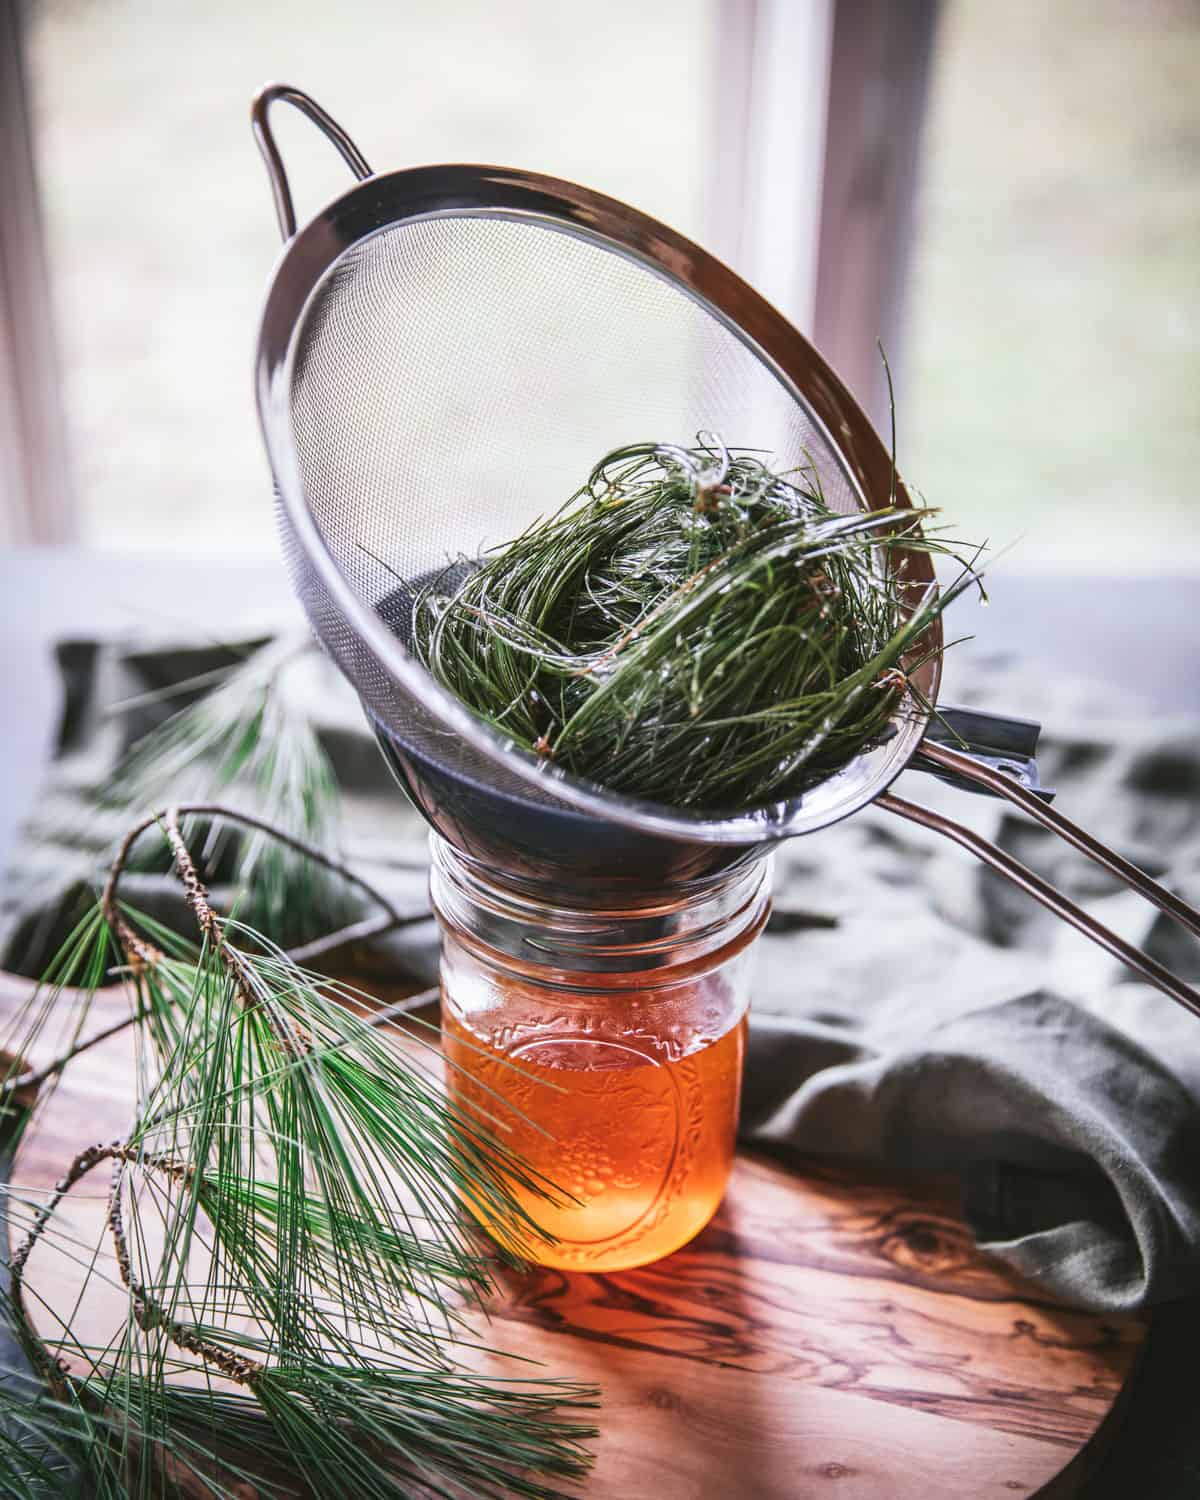 A mesh strainer filled with pine needles atop a jar of strained honey.